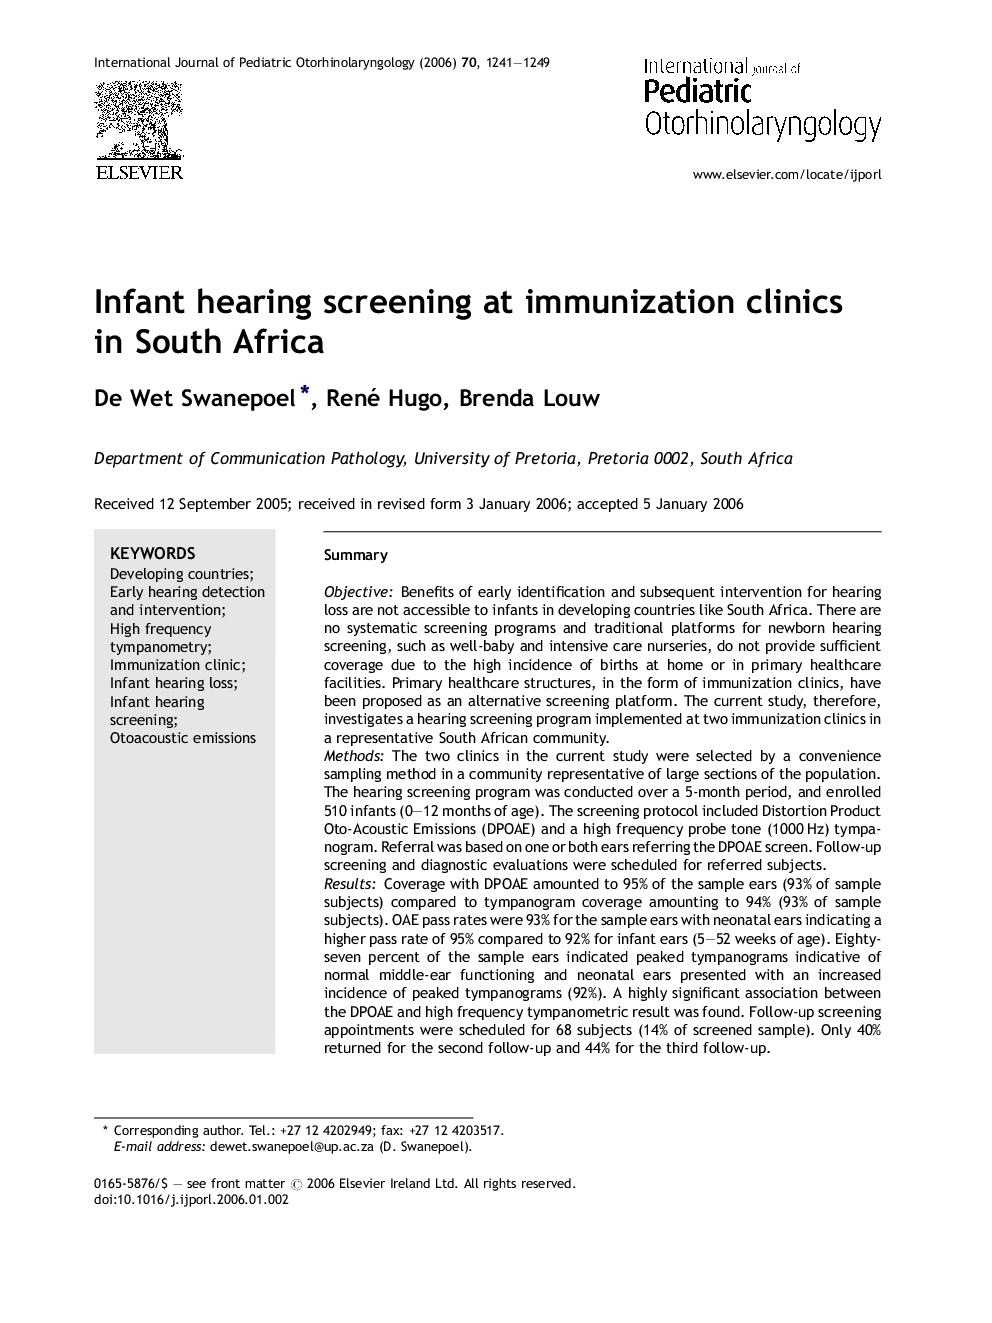 Infant hearing screening at immunization clinics in South Africa